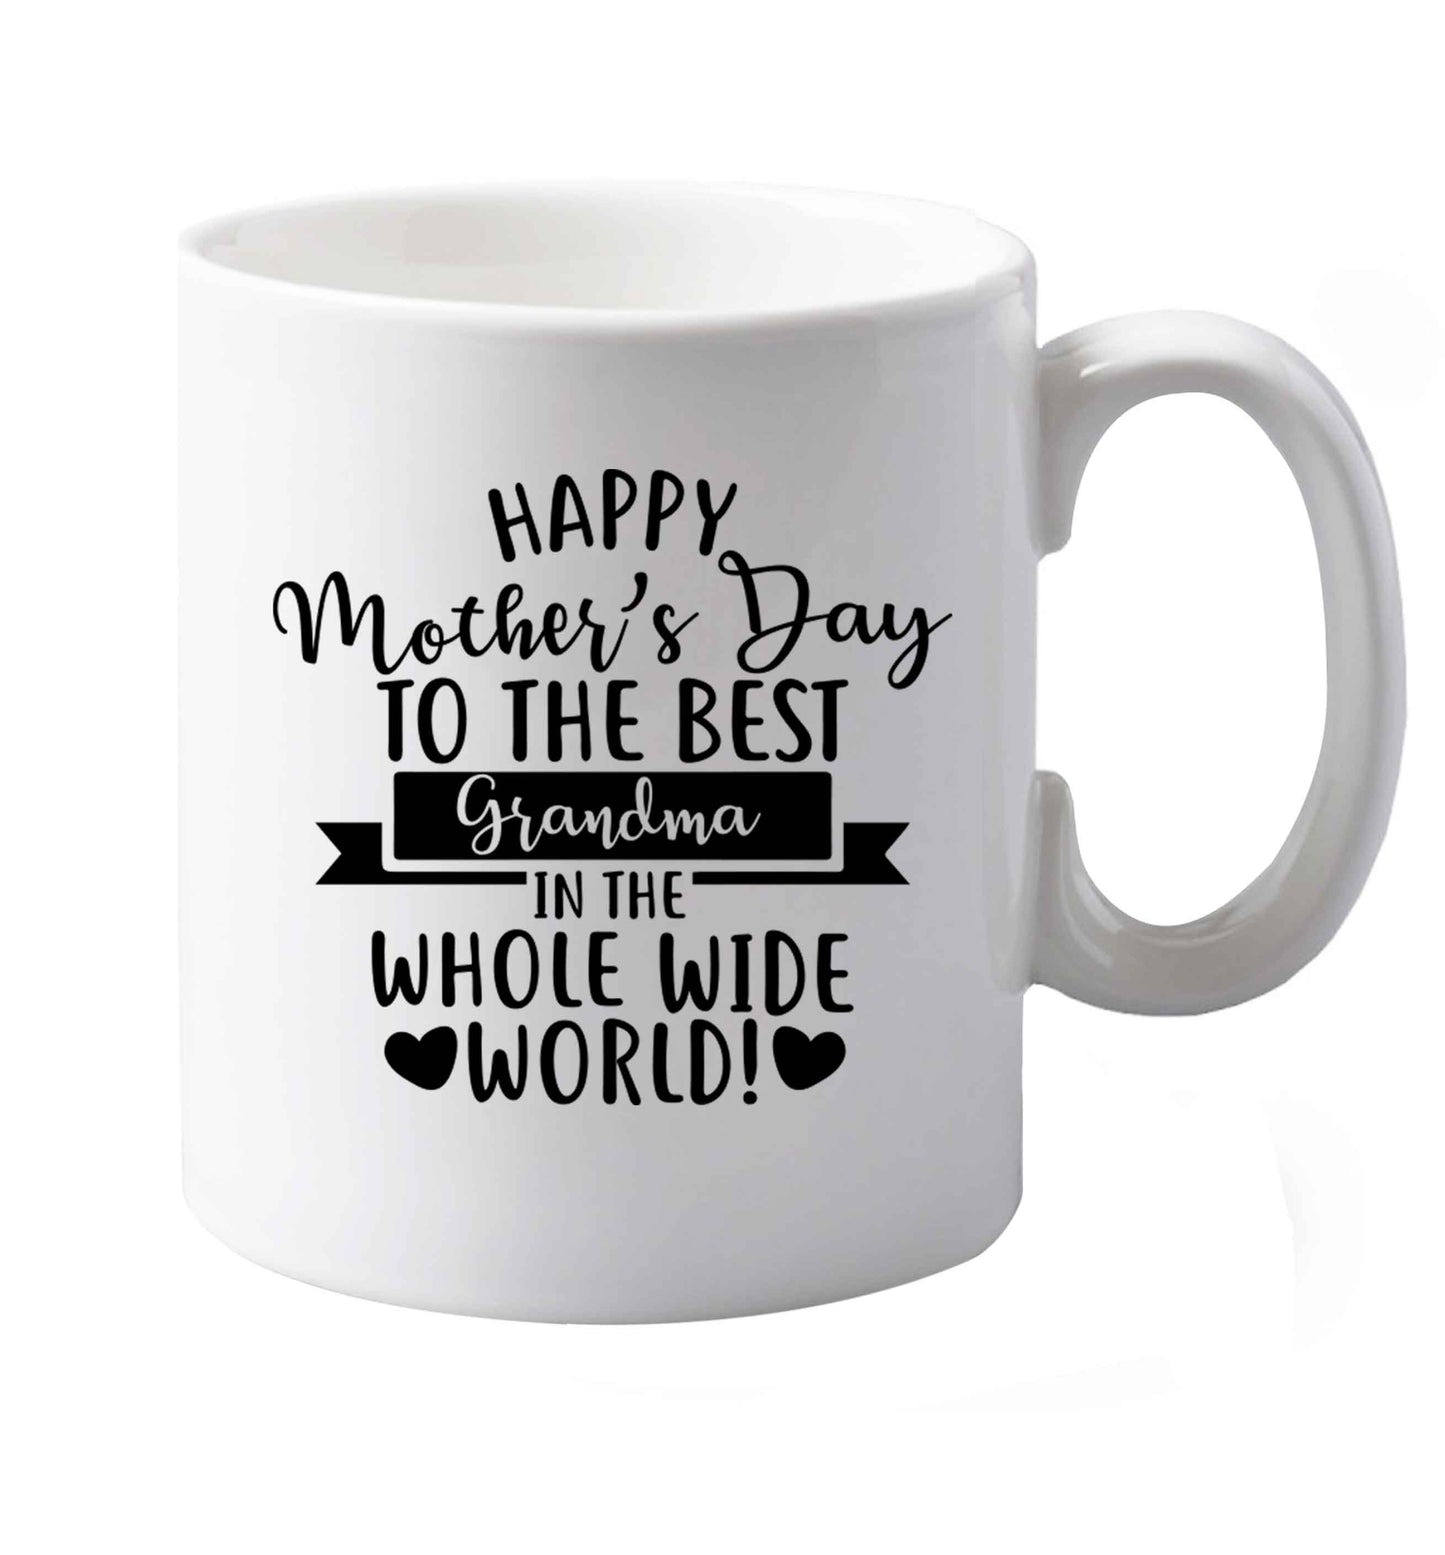 10 oz Happy mother's day to the best grandma in the world ceramic mug both sides